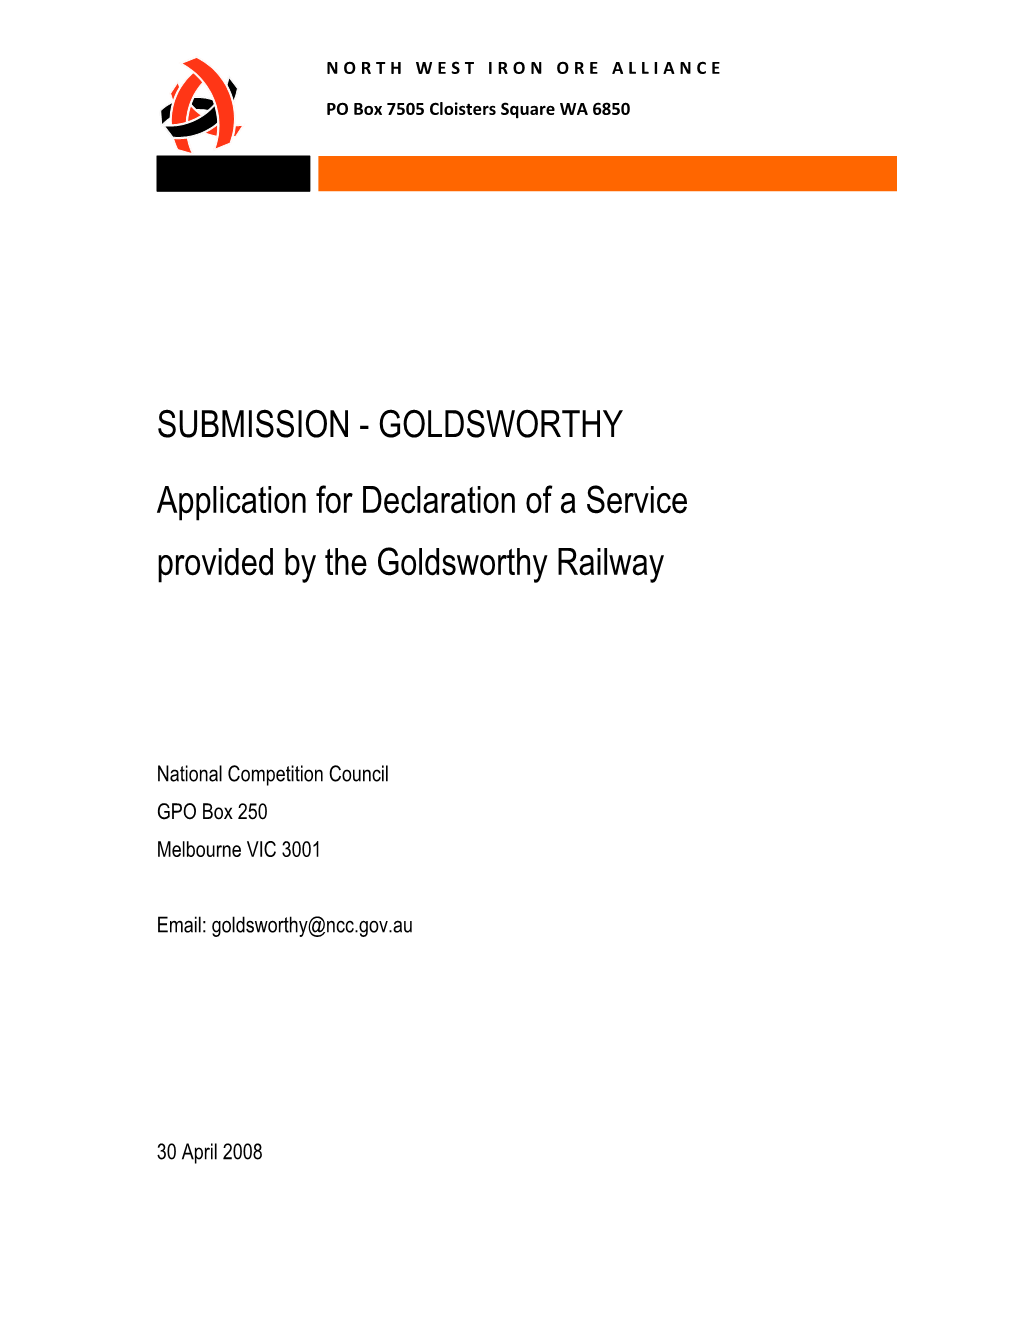 Application for Declaration of the Goldsworthy Railway, Submission by North West Iron Ore Alliance, 30 April 2008